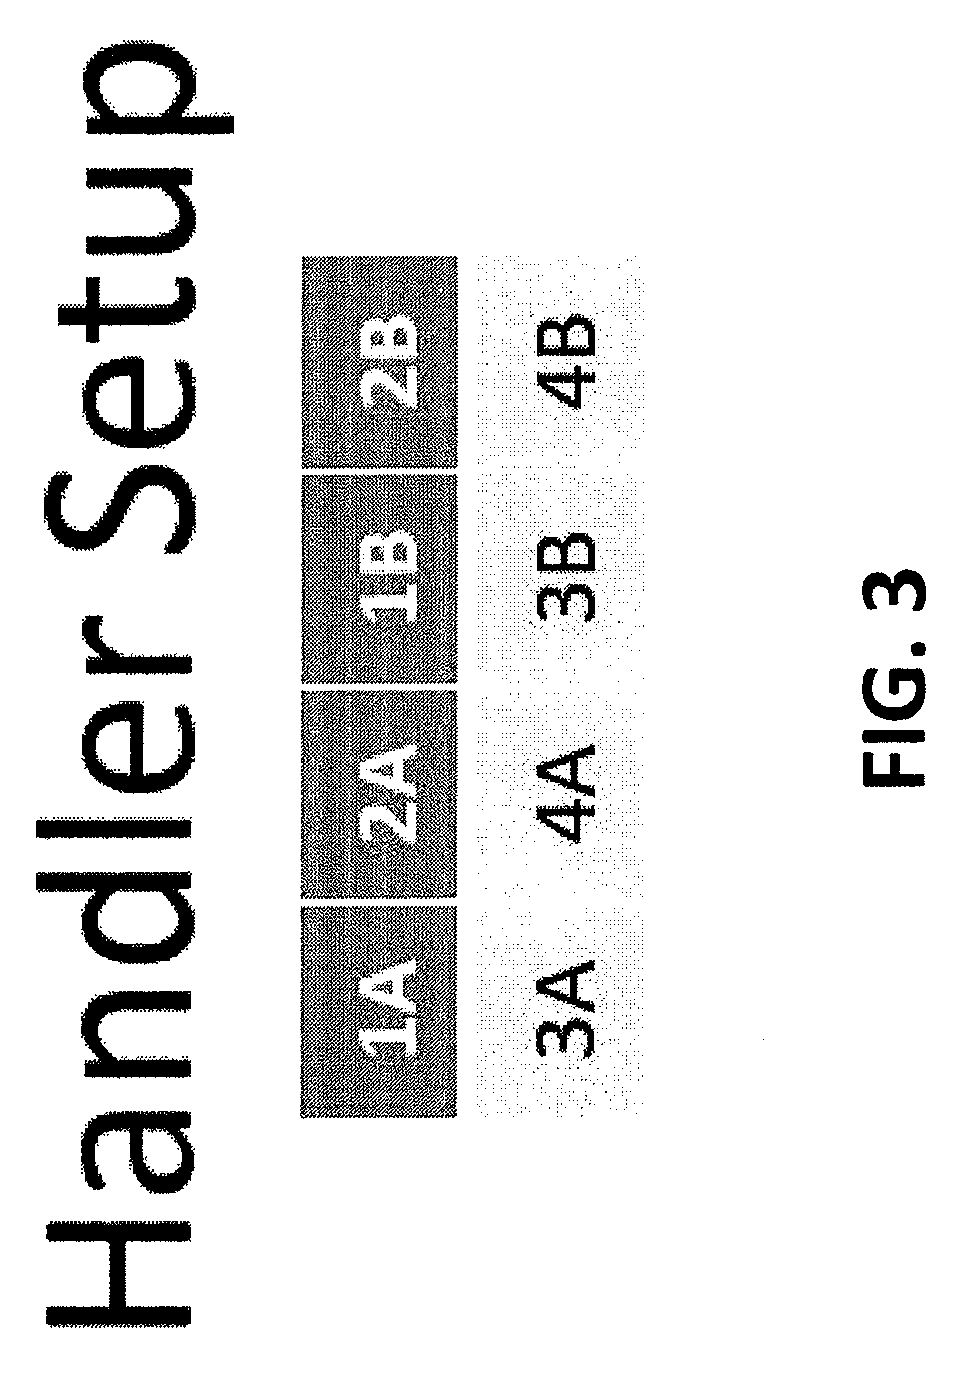 Method for continuous tester operation during multiple stage temperature testing